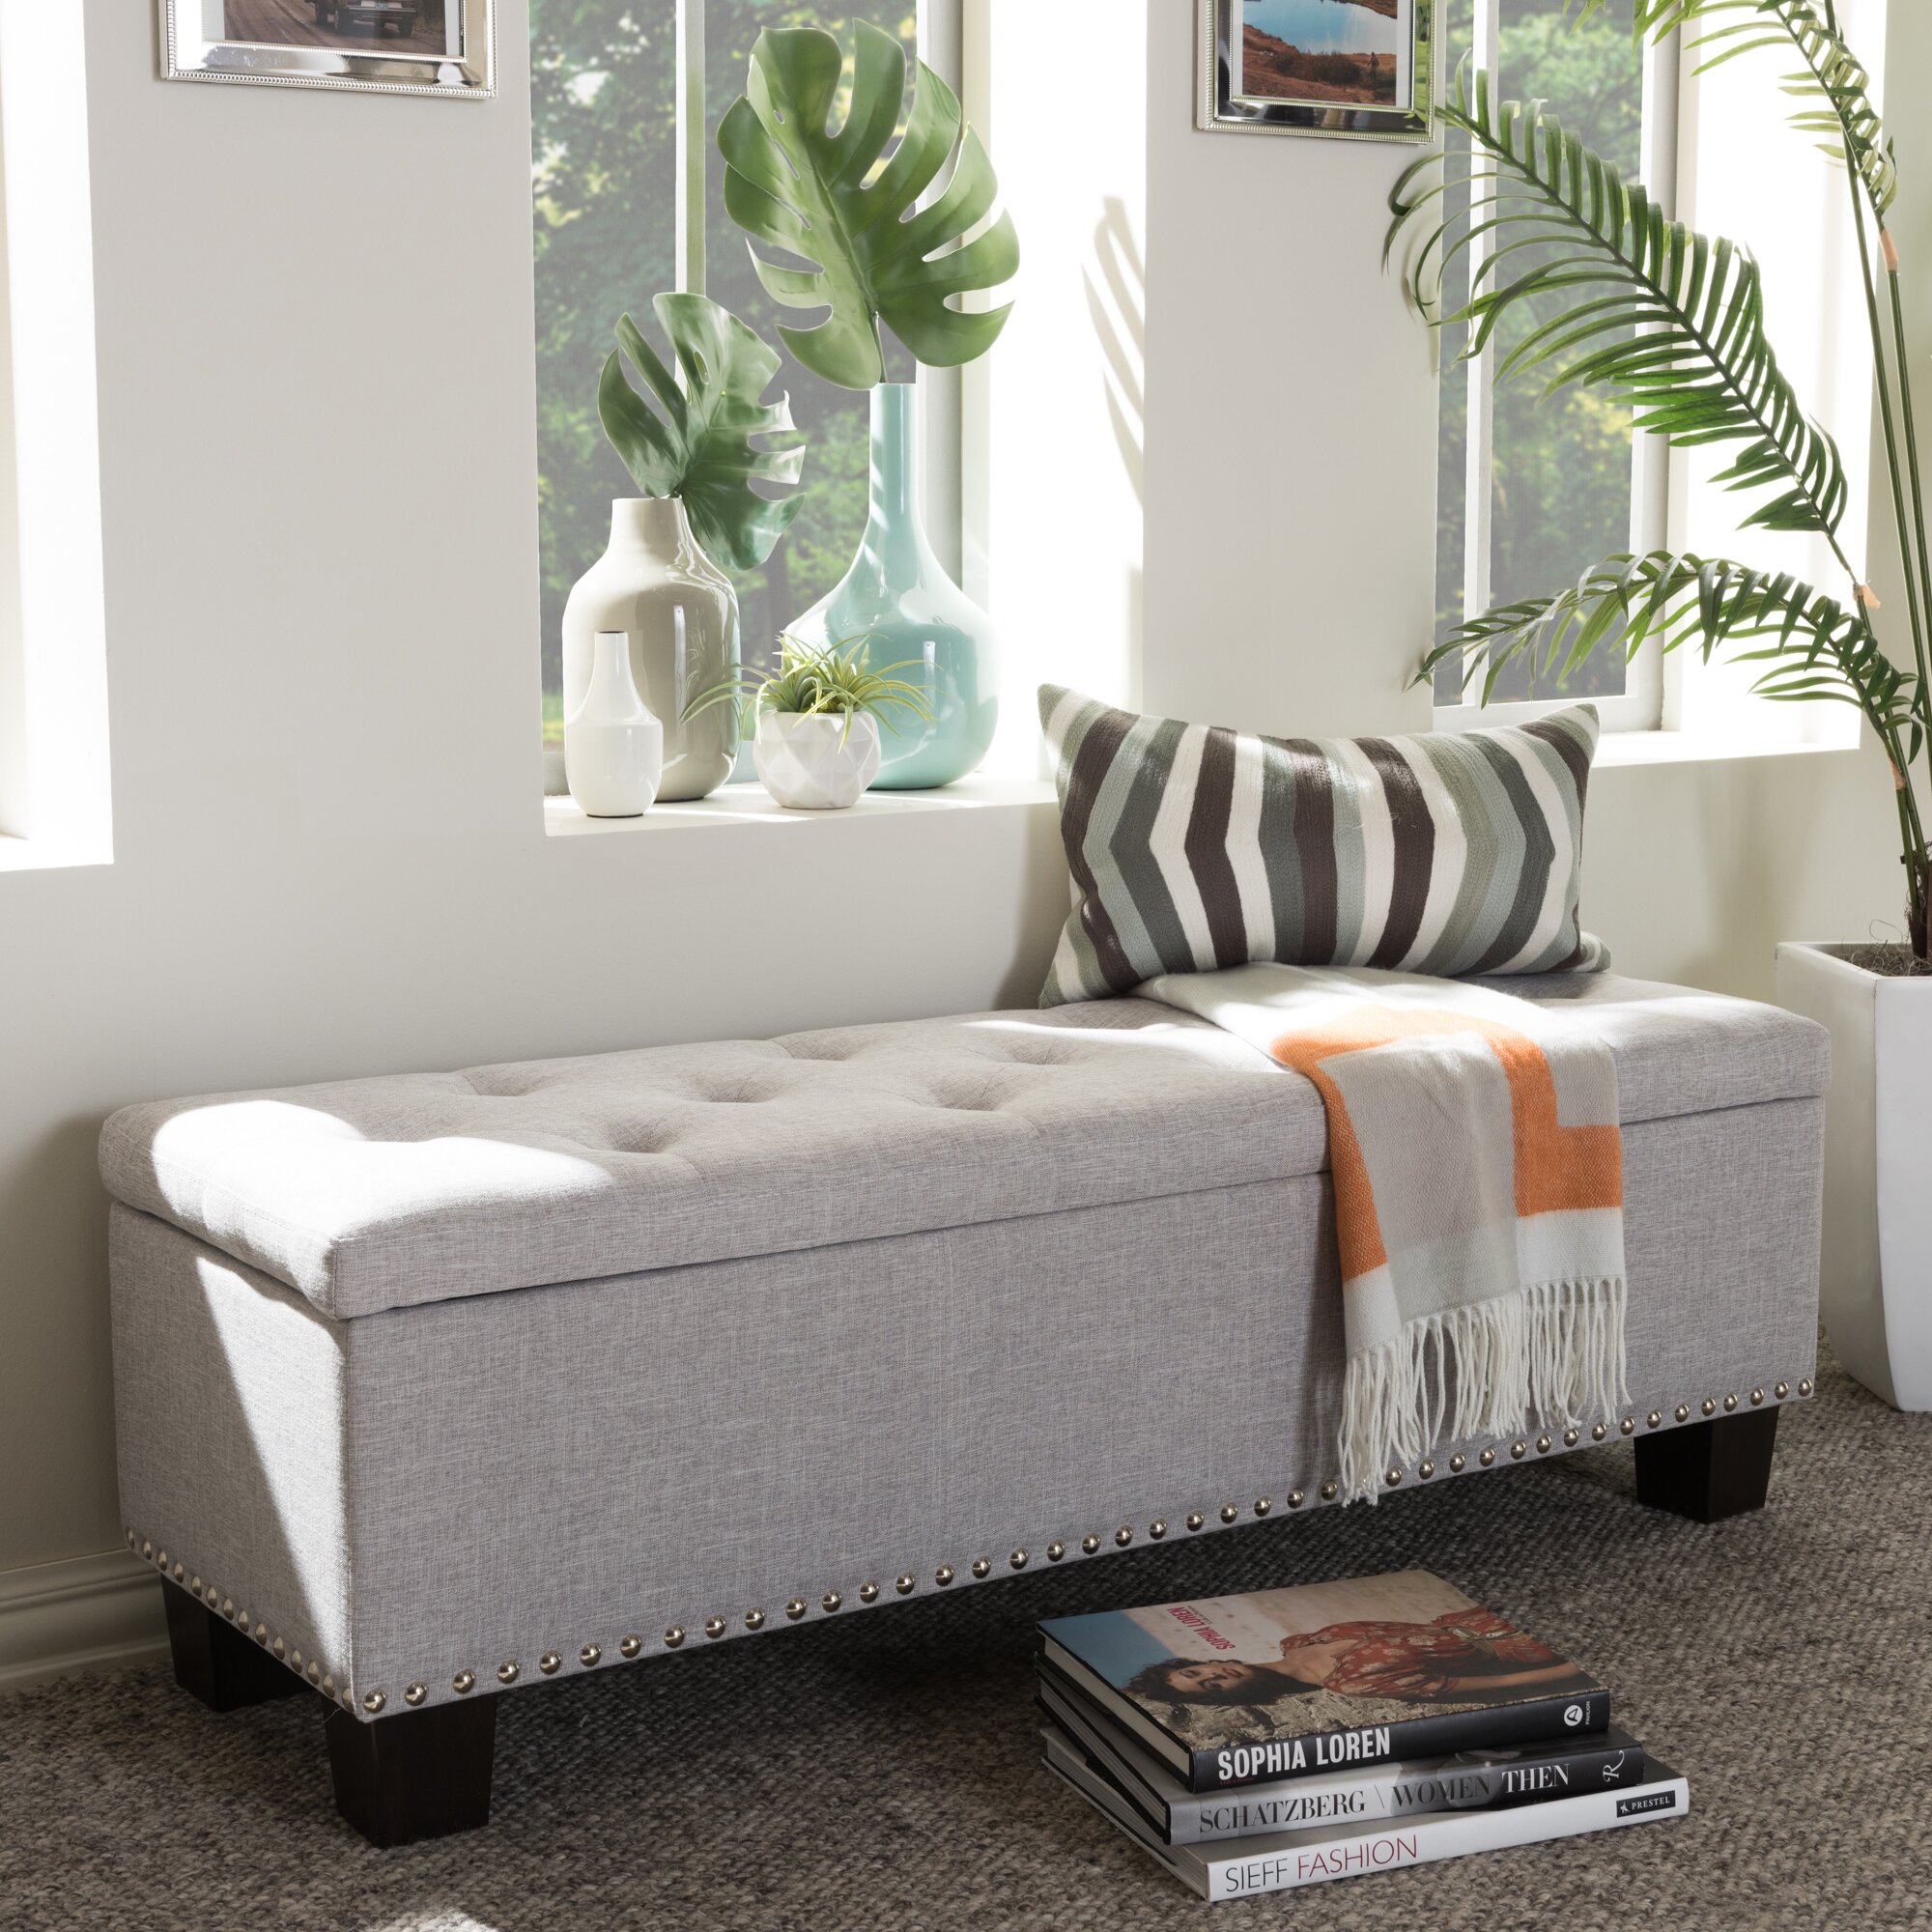 Maintaining The Elegance Of Your Bedroom Upholstered Bench